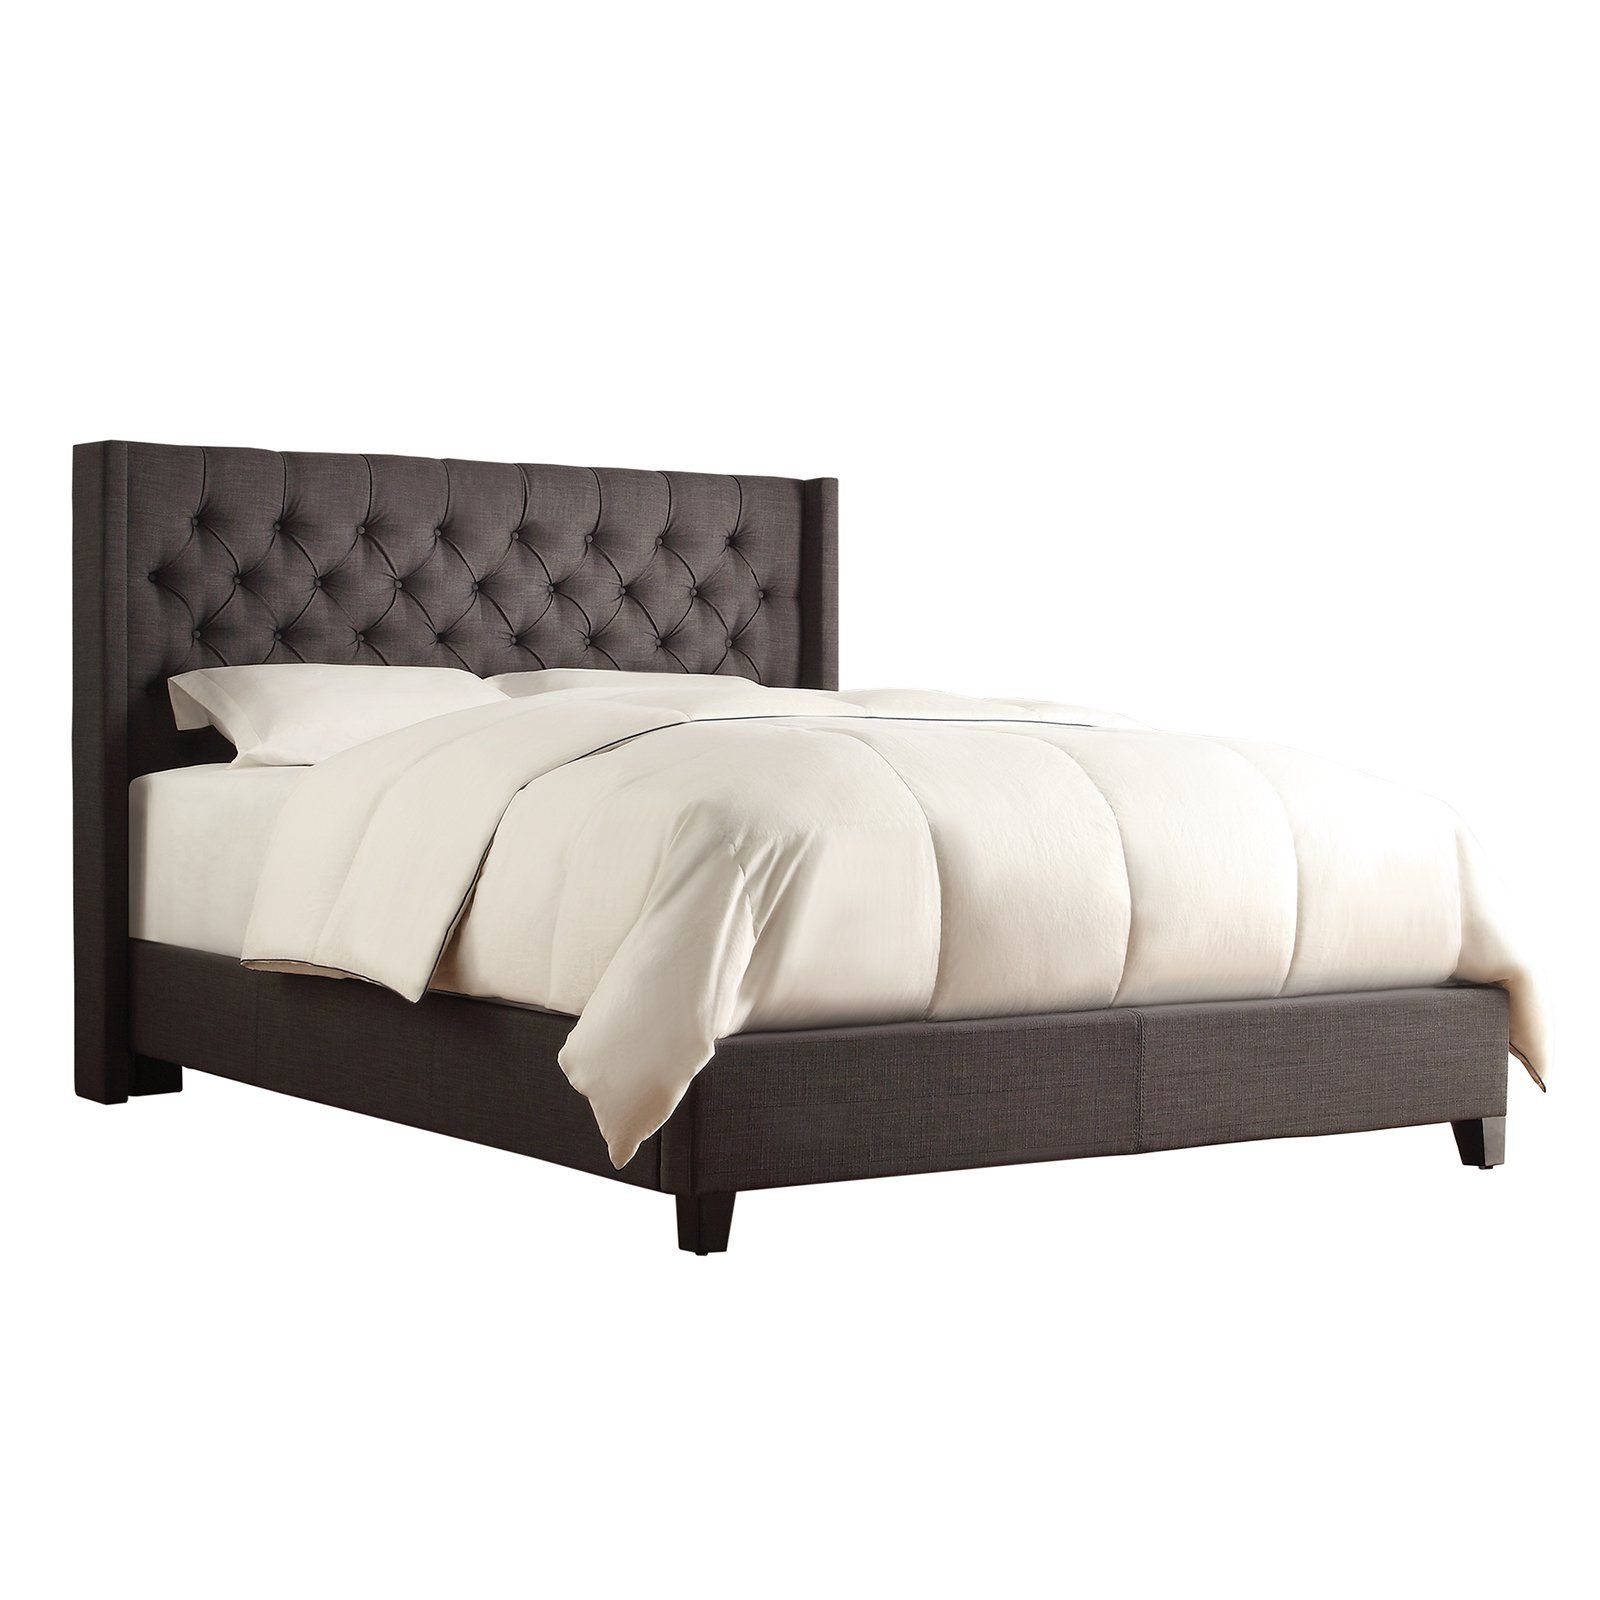 Weston Home Yarmouth Wingback Upholstered Low Profile Bed | Walmart (US)